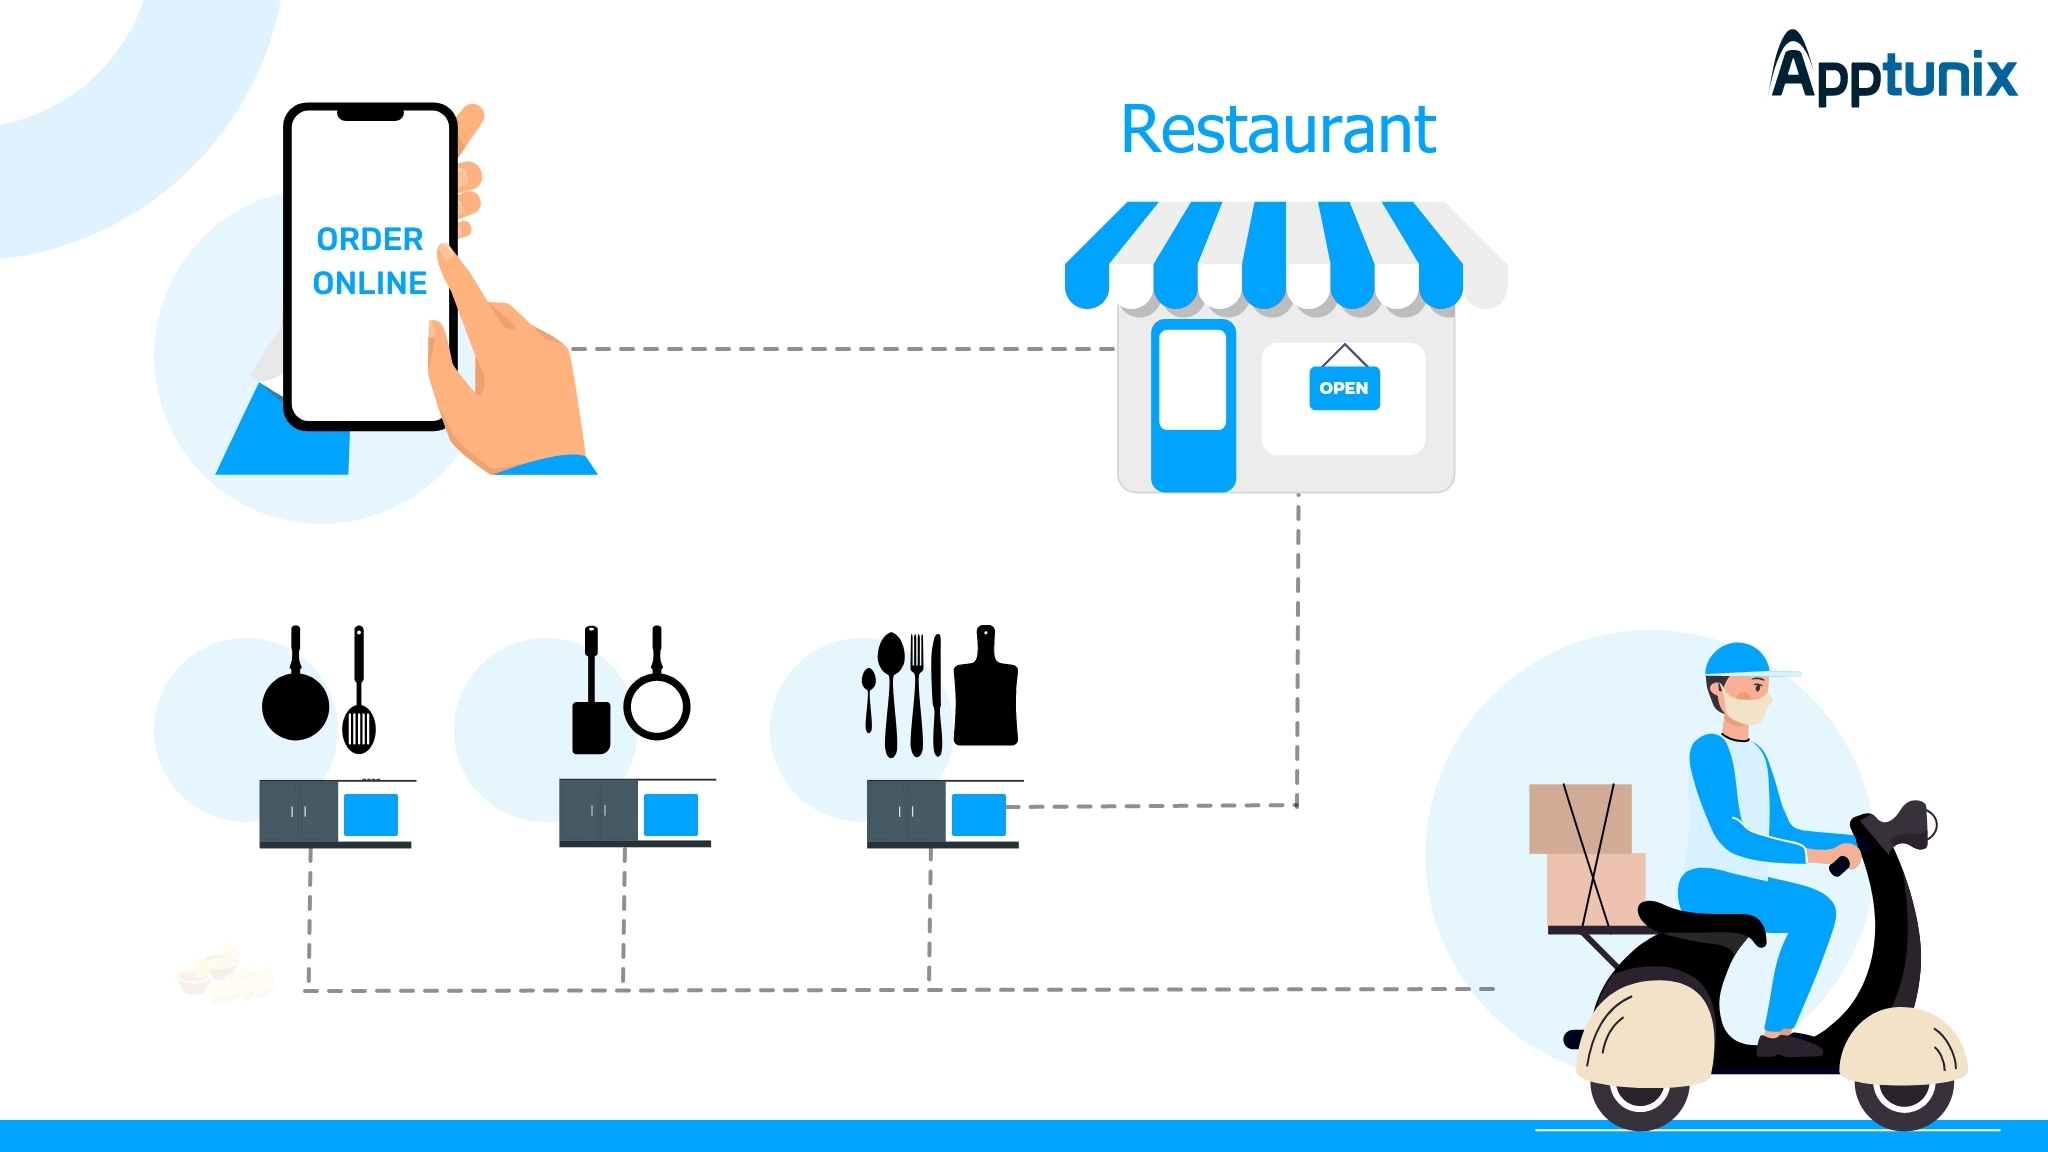 Why Does Your Restaurant Need A Cloud Kitchen Business Model?